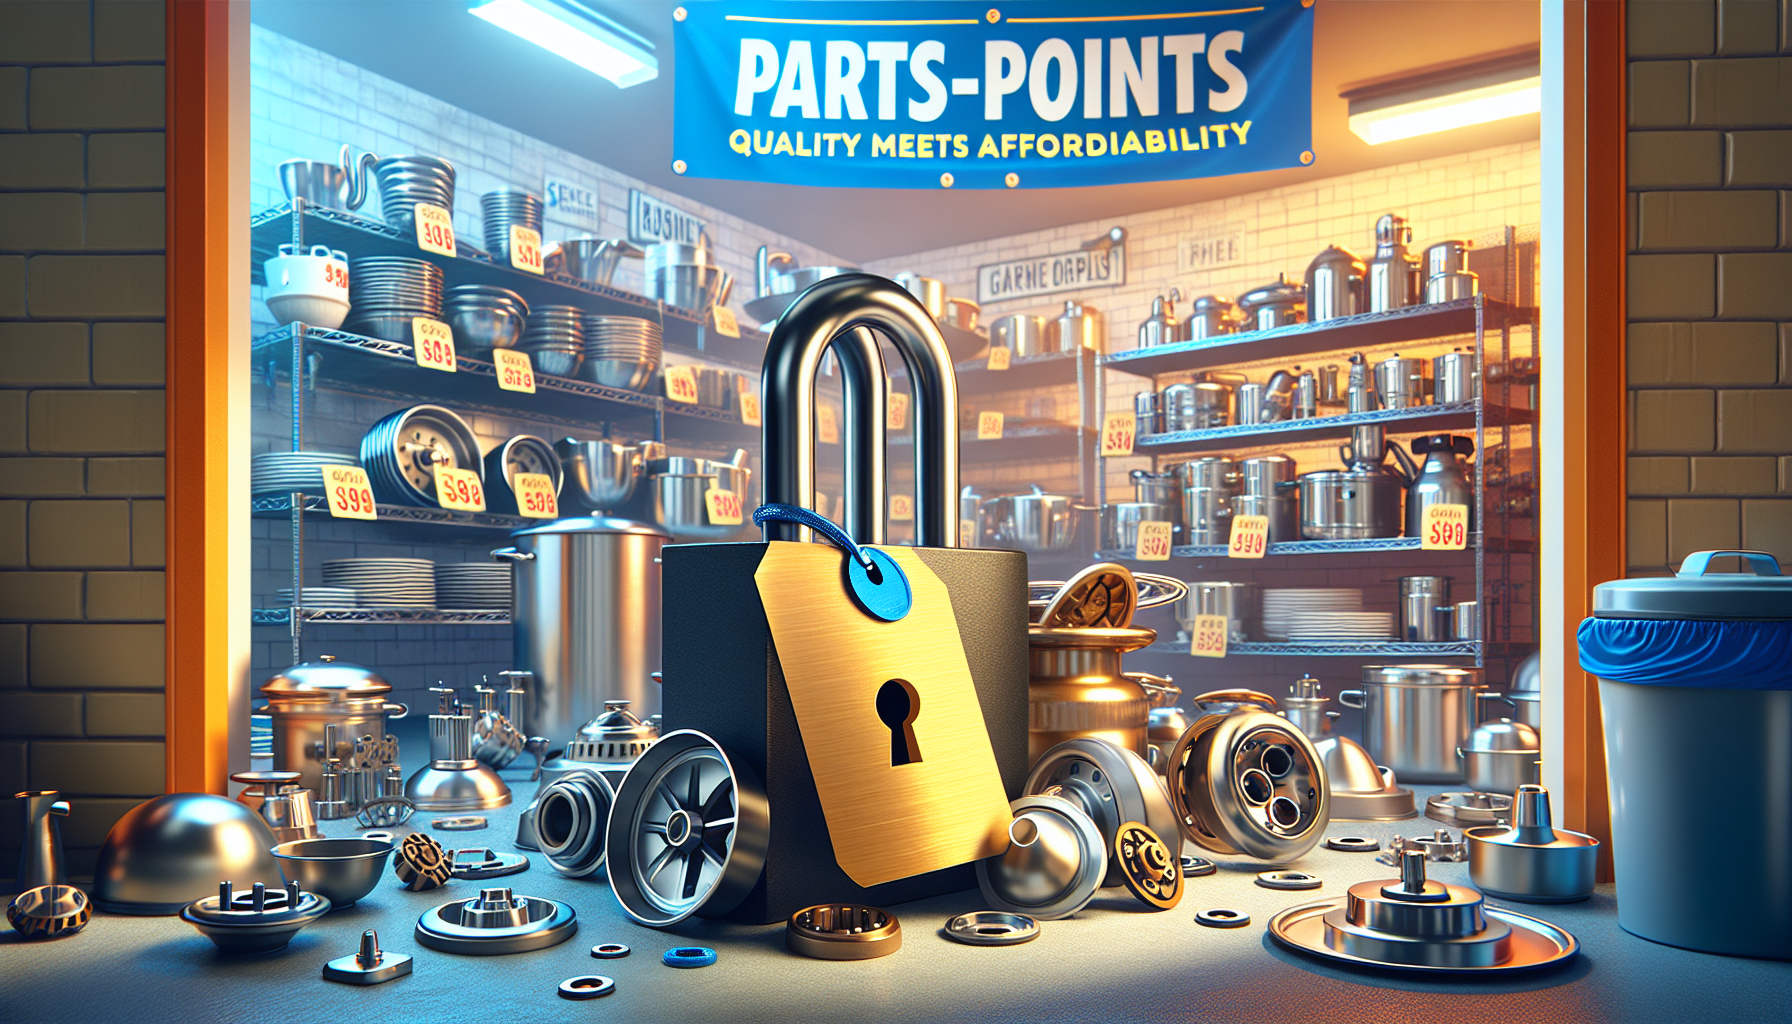 Unlock Savings on Superior Restaurant Equipment Parts at Parts-Points: Quality Meets Affordability